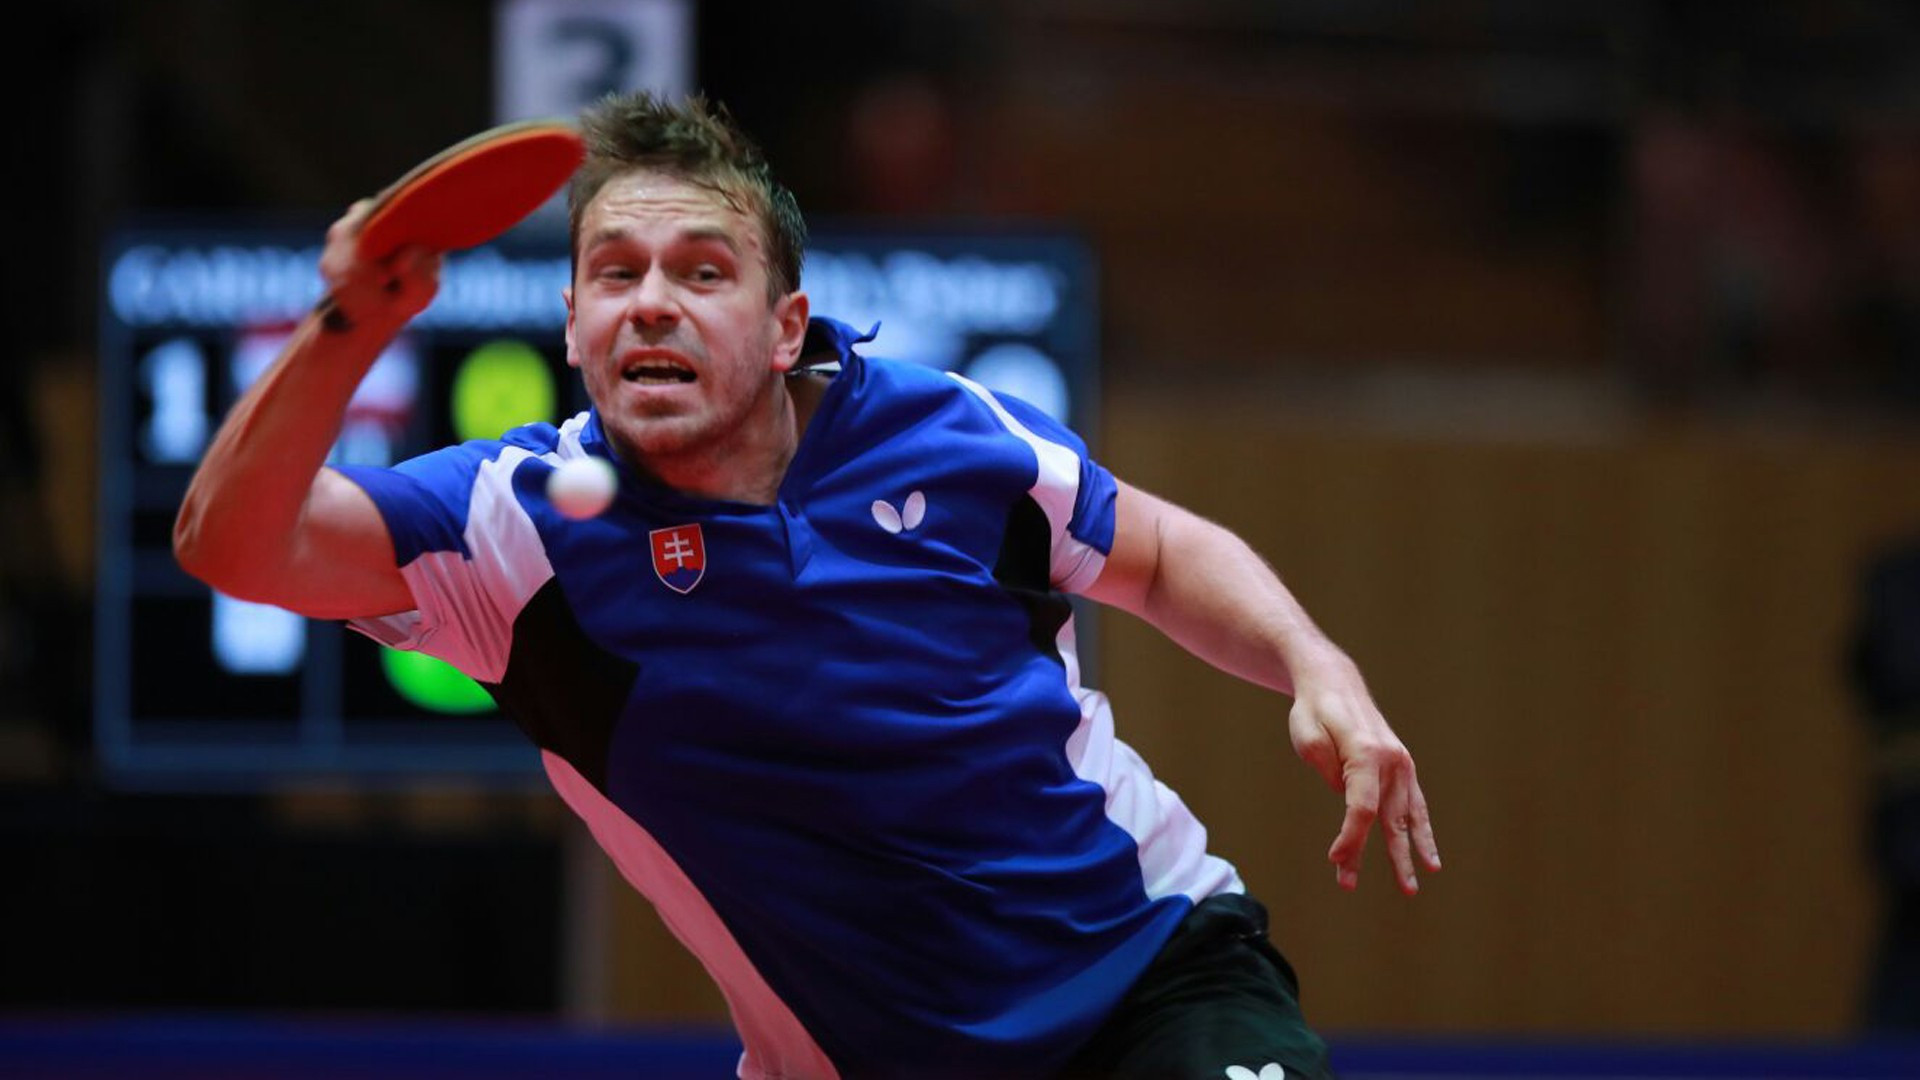 Slovakia inflicted a 3-2 defeat on defending champions Austria in their opening men's group match at the ITTF European Team Championships ©ITTF